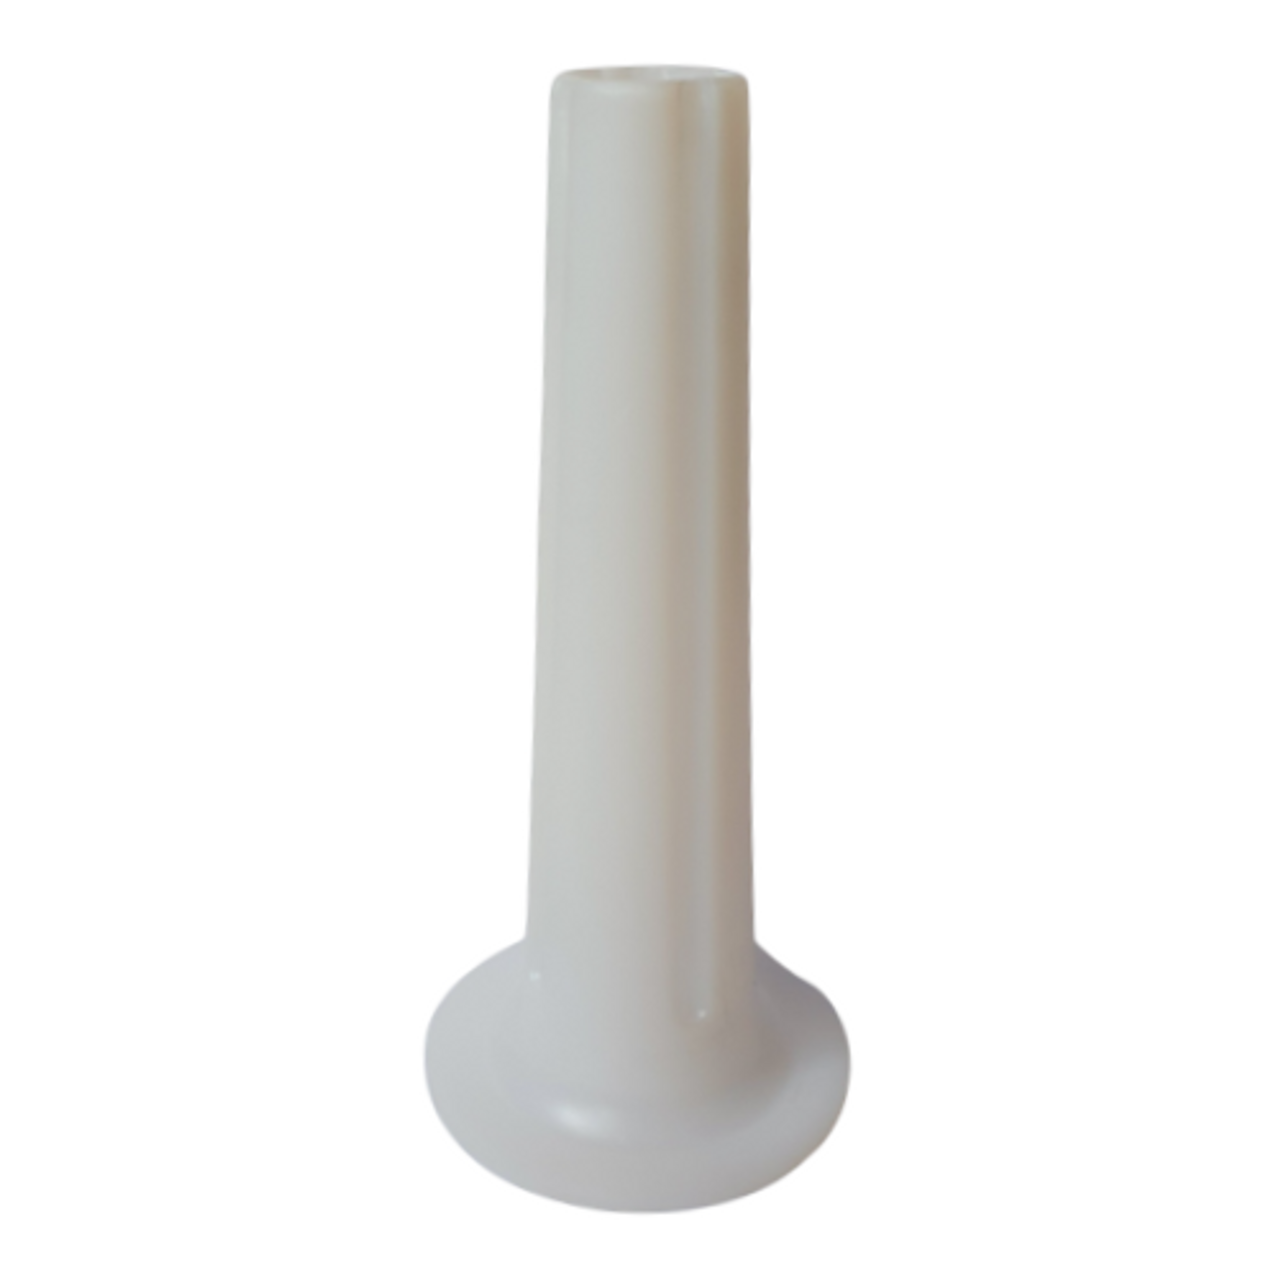 Plastic funnel No. 8 for sausage stuffing, 1 pc.